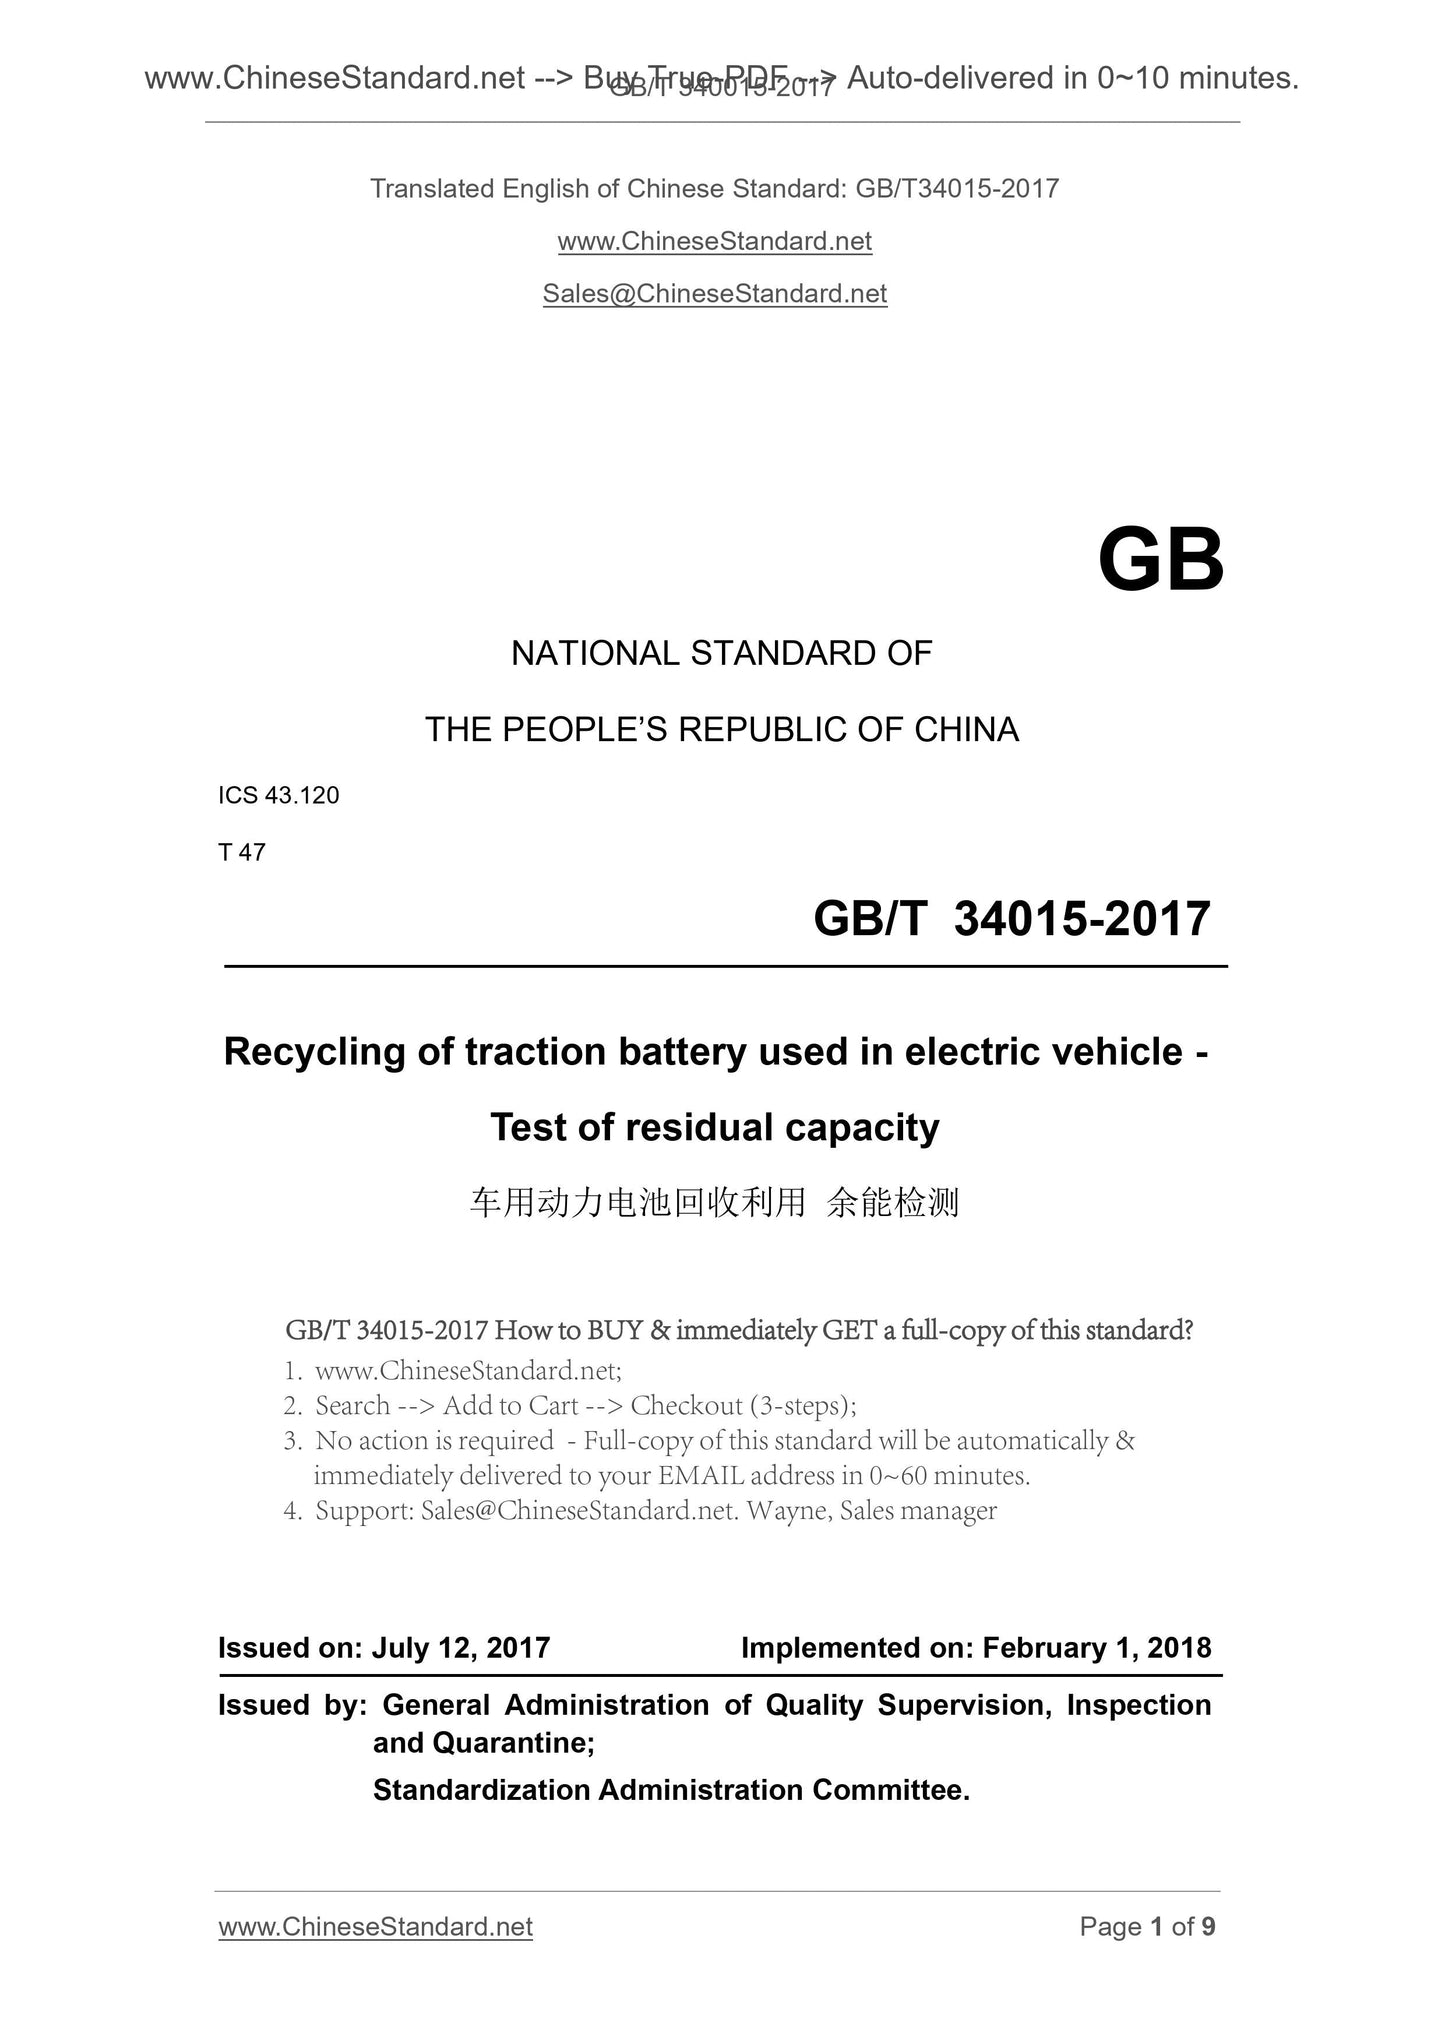 GB/T 34015-2017 Page 1